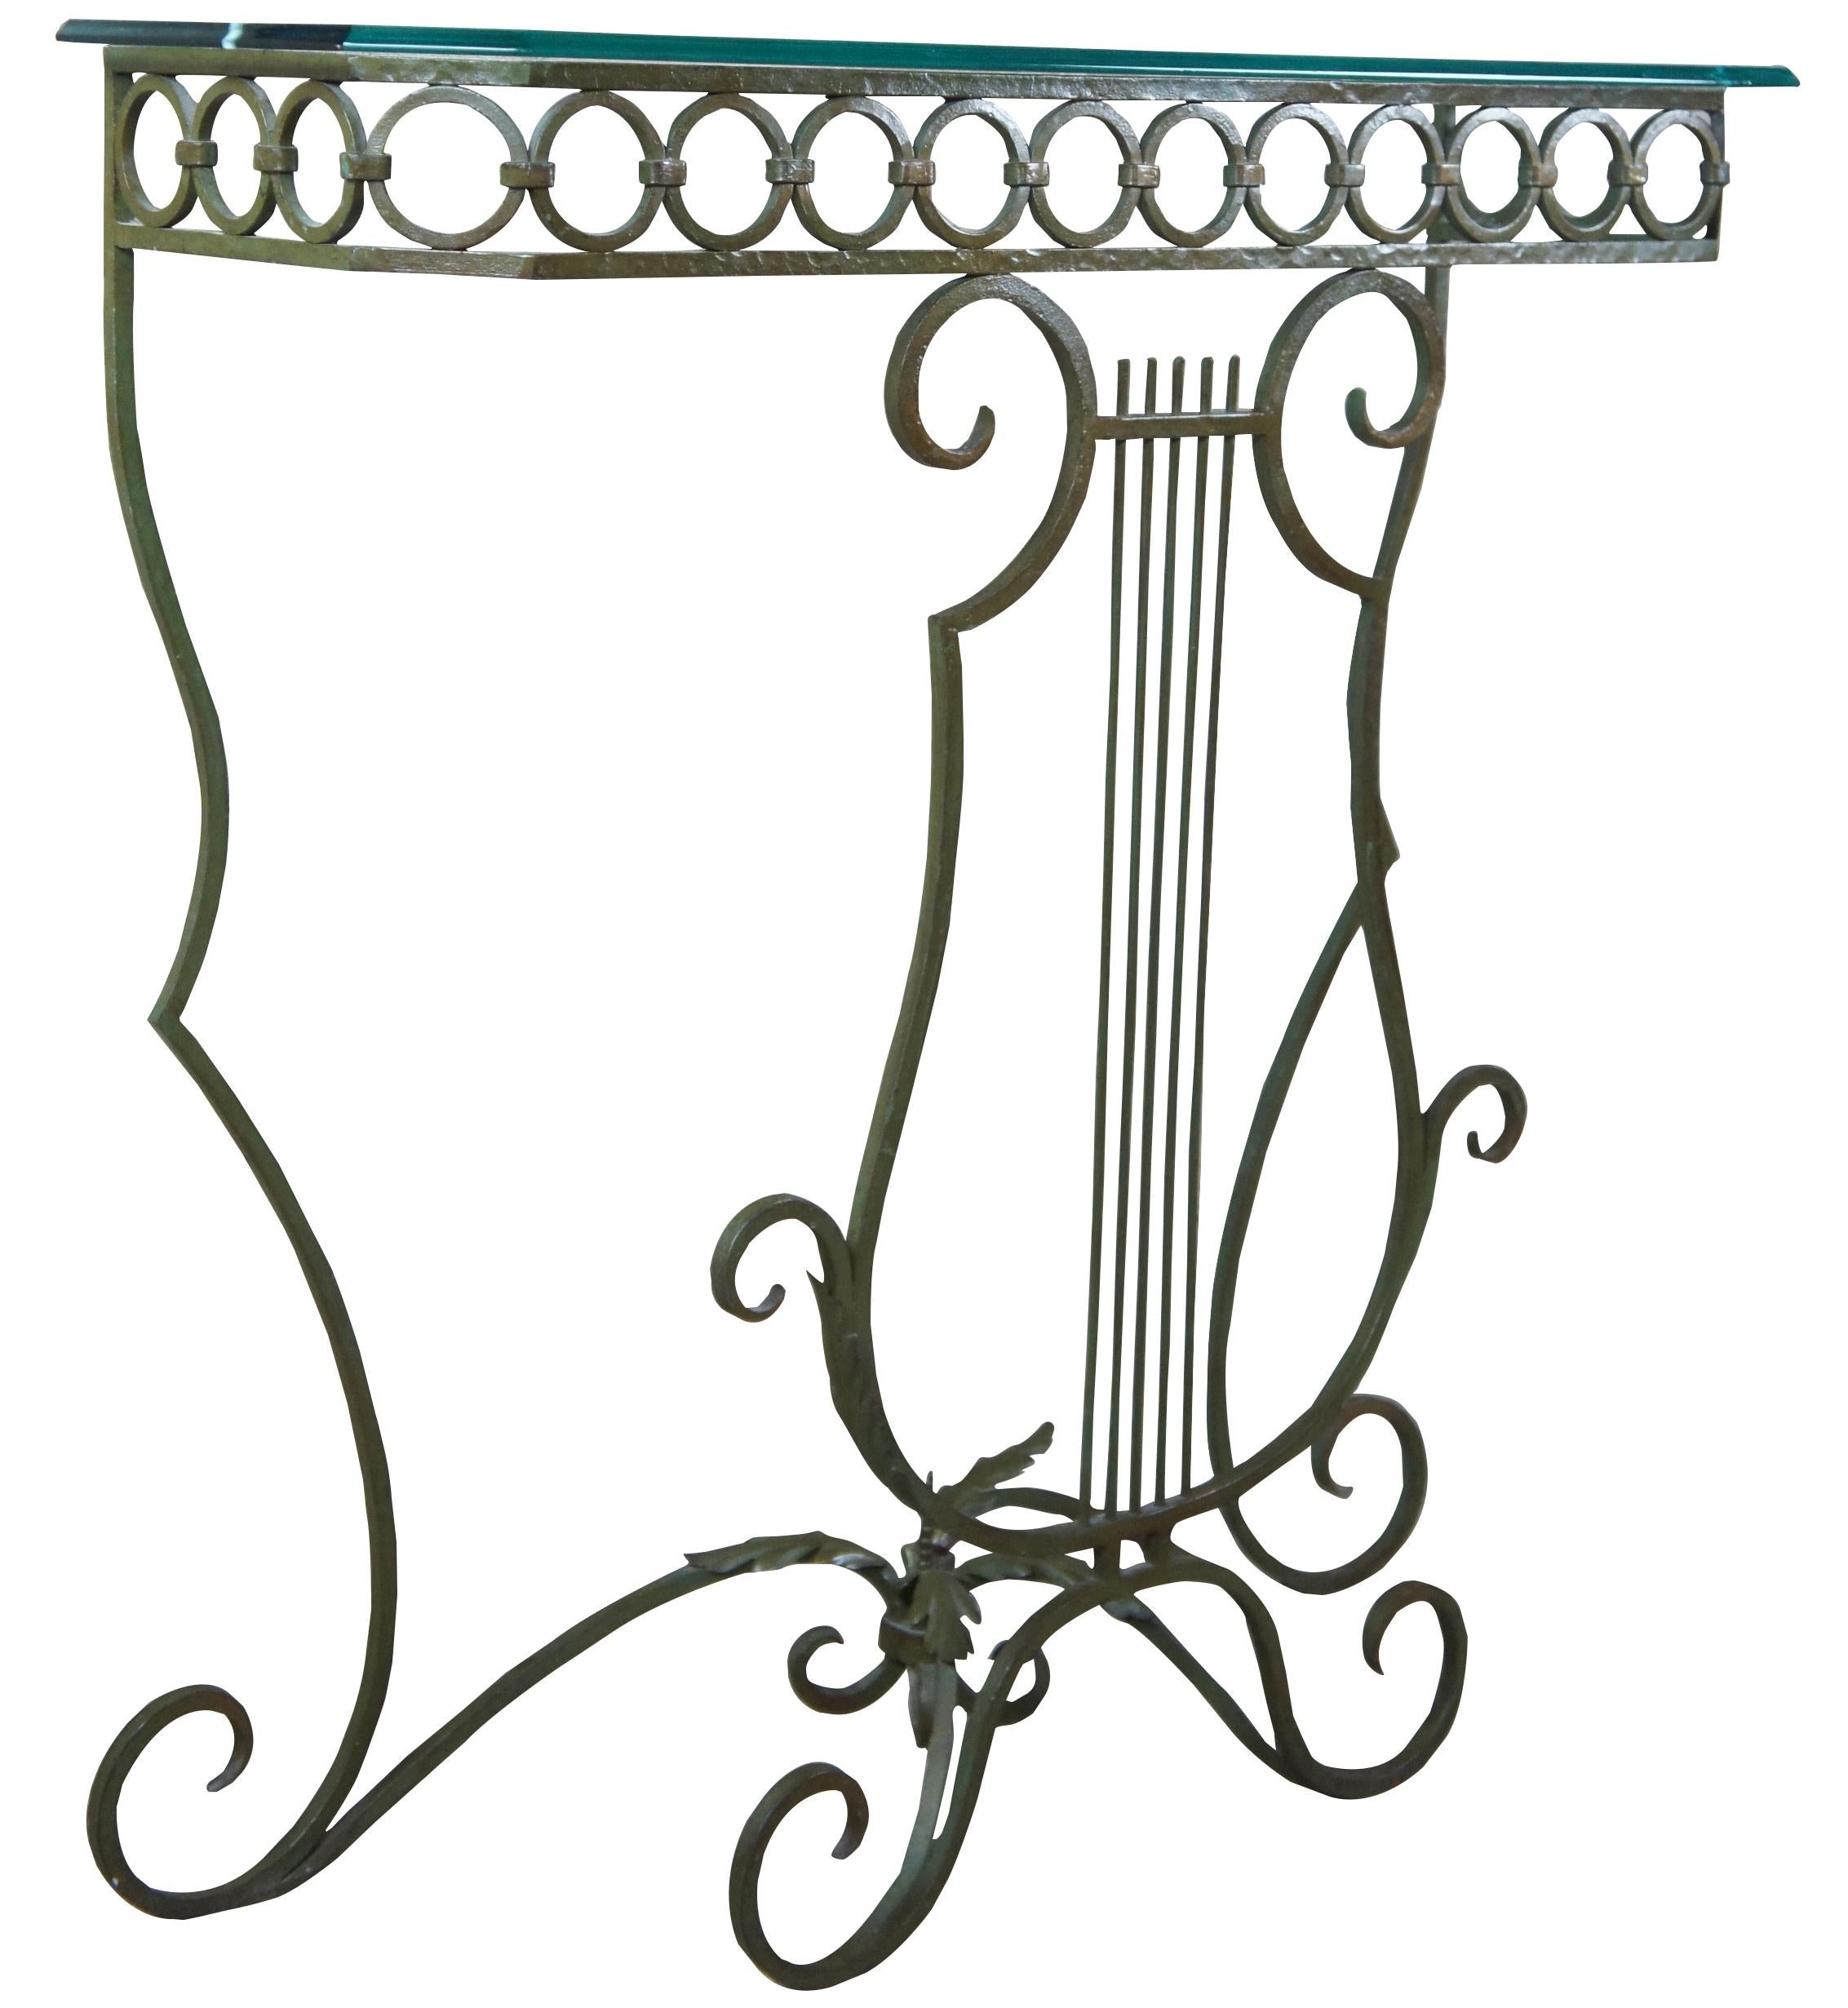 Late 20th century wrought iron with verdegris finish console table with glass top. Features s harpe front, scrolled feet and a ringed gallery and acanthus accents.
 